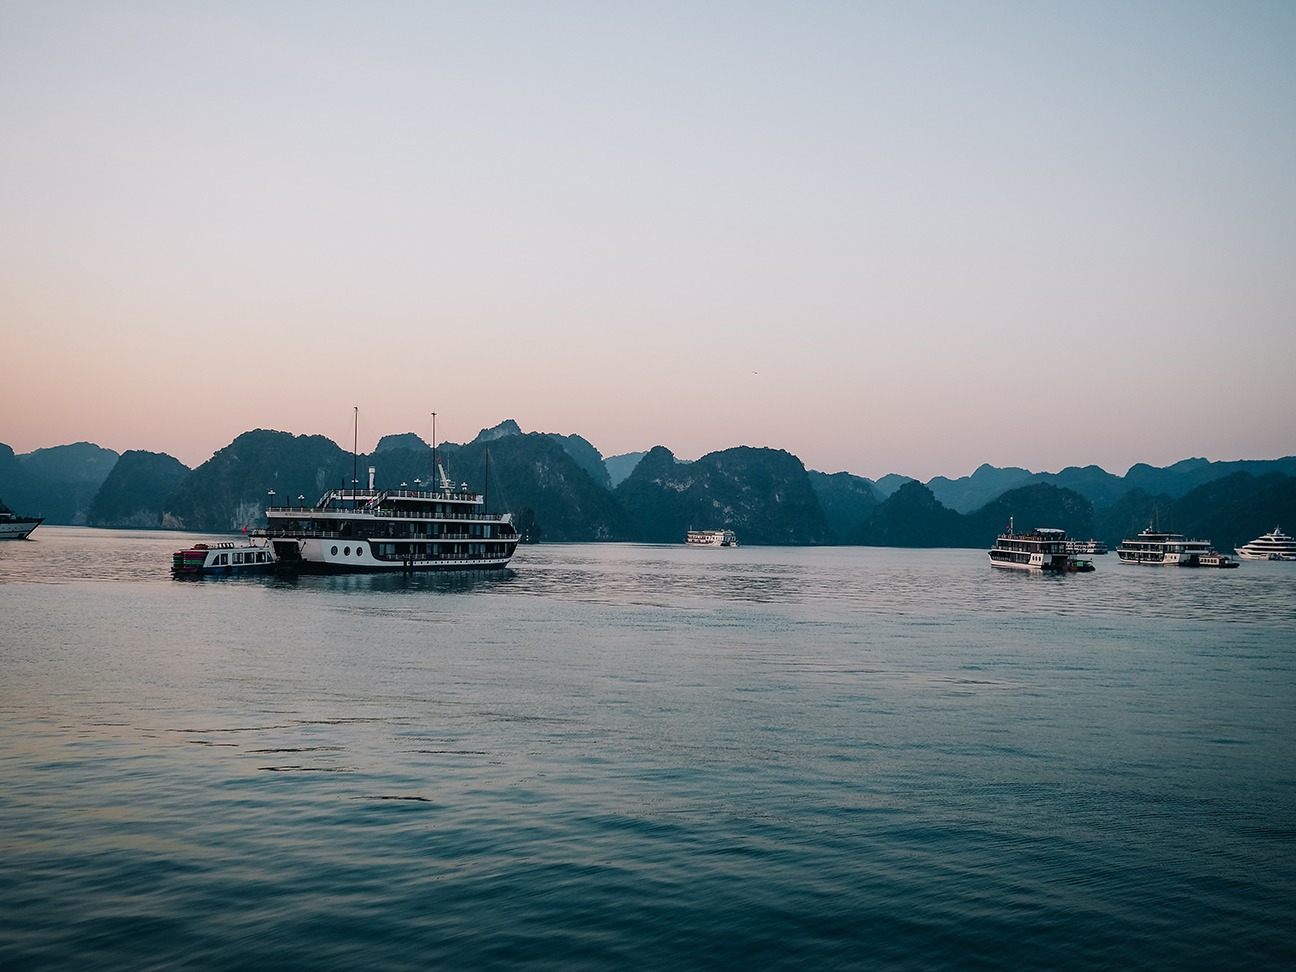 Ha Long Bay from the cruise